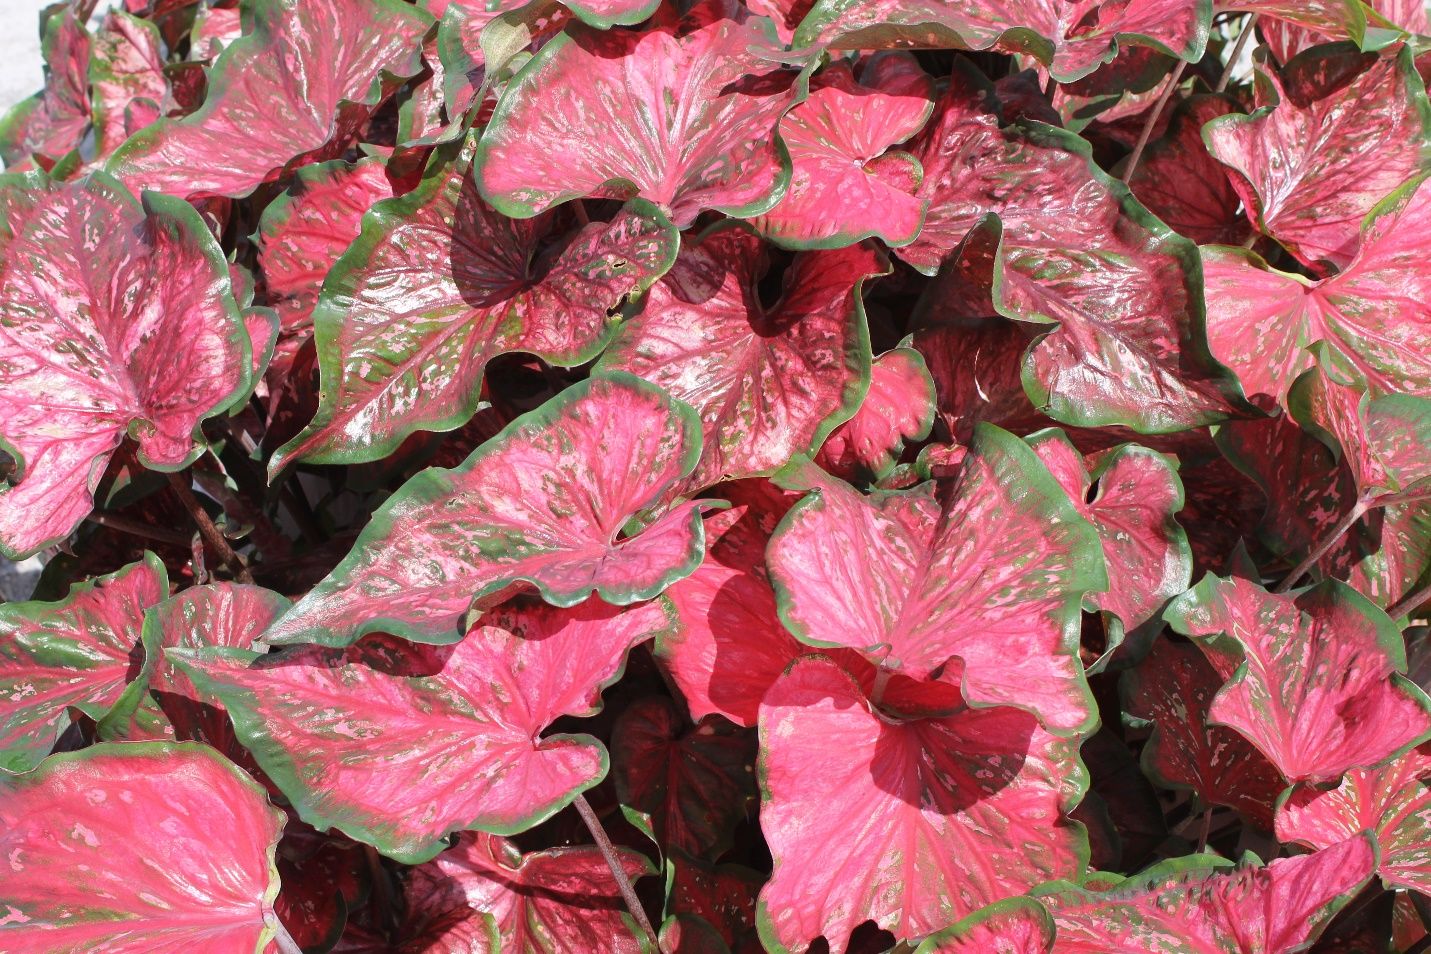 Typical leaves of ‘Pink Panther’ caladium grown in the open field in full sun. 